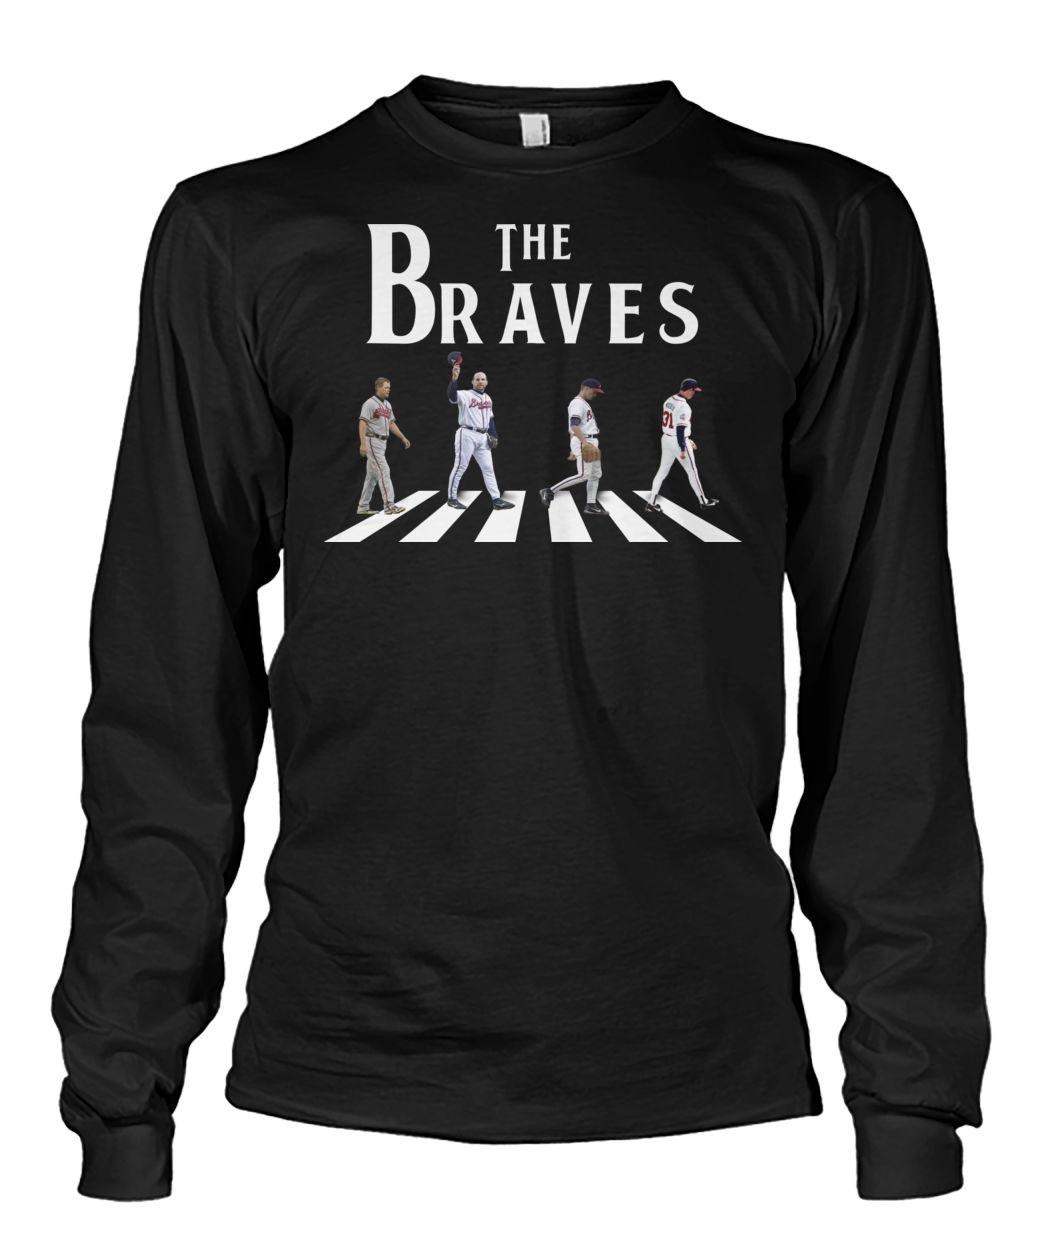 The braves abbey road long sleeved shirt